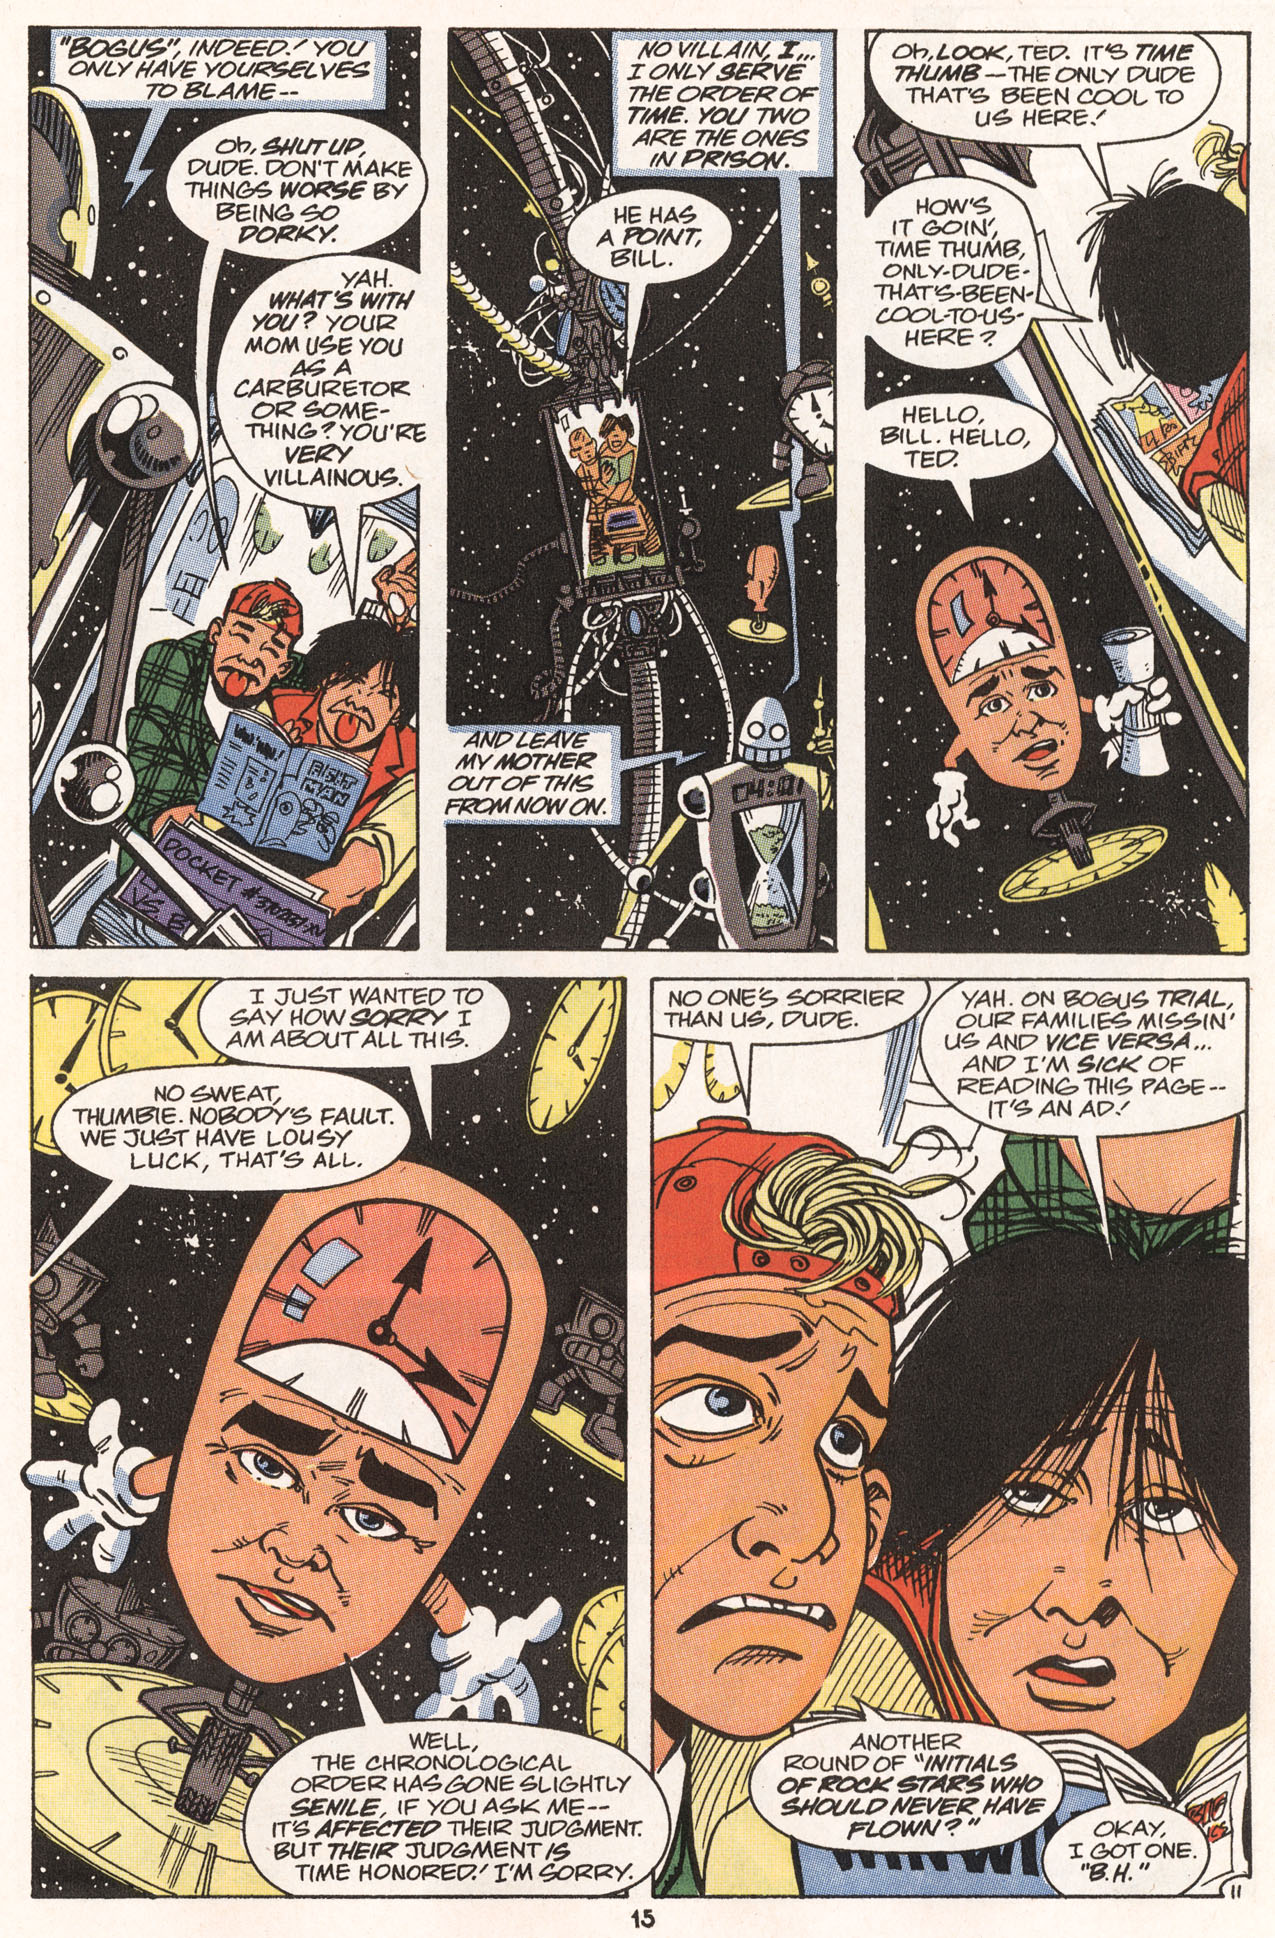 Read online Bill & Ted's Excellent Comic Book comic -  Issue #6 - 16